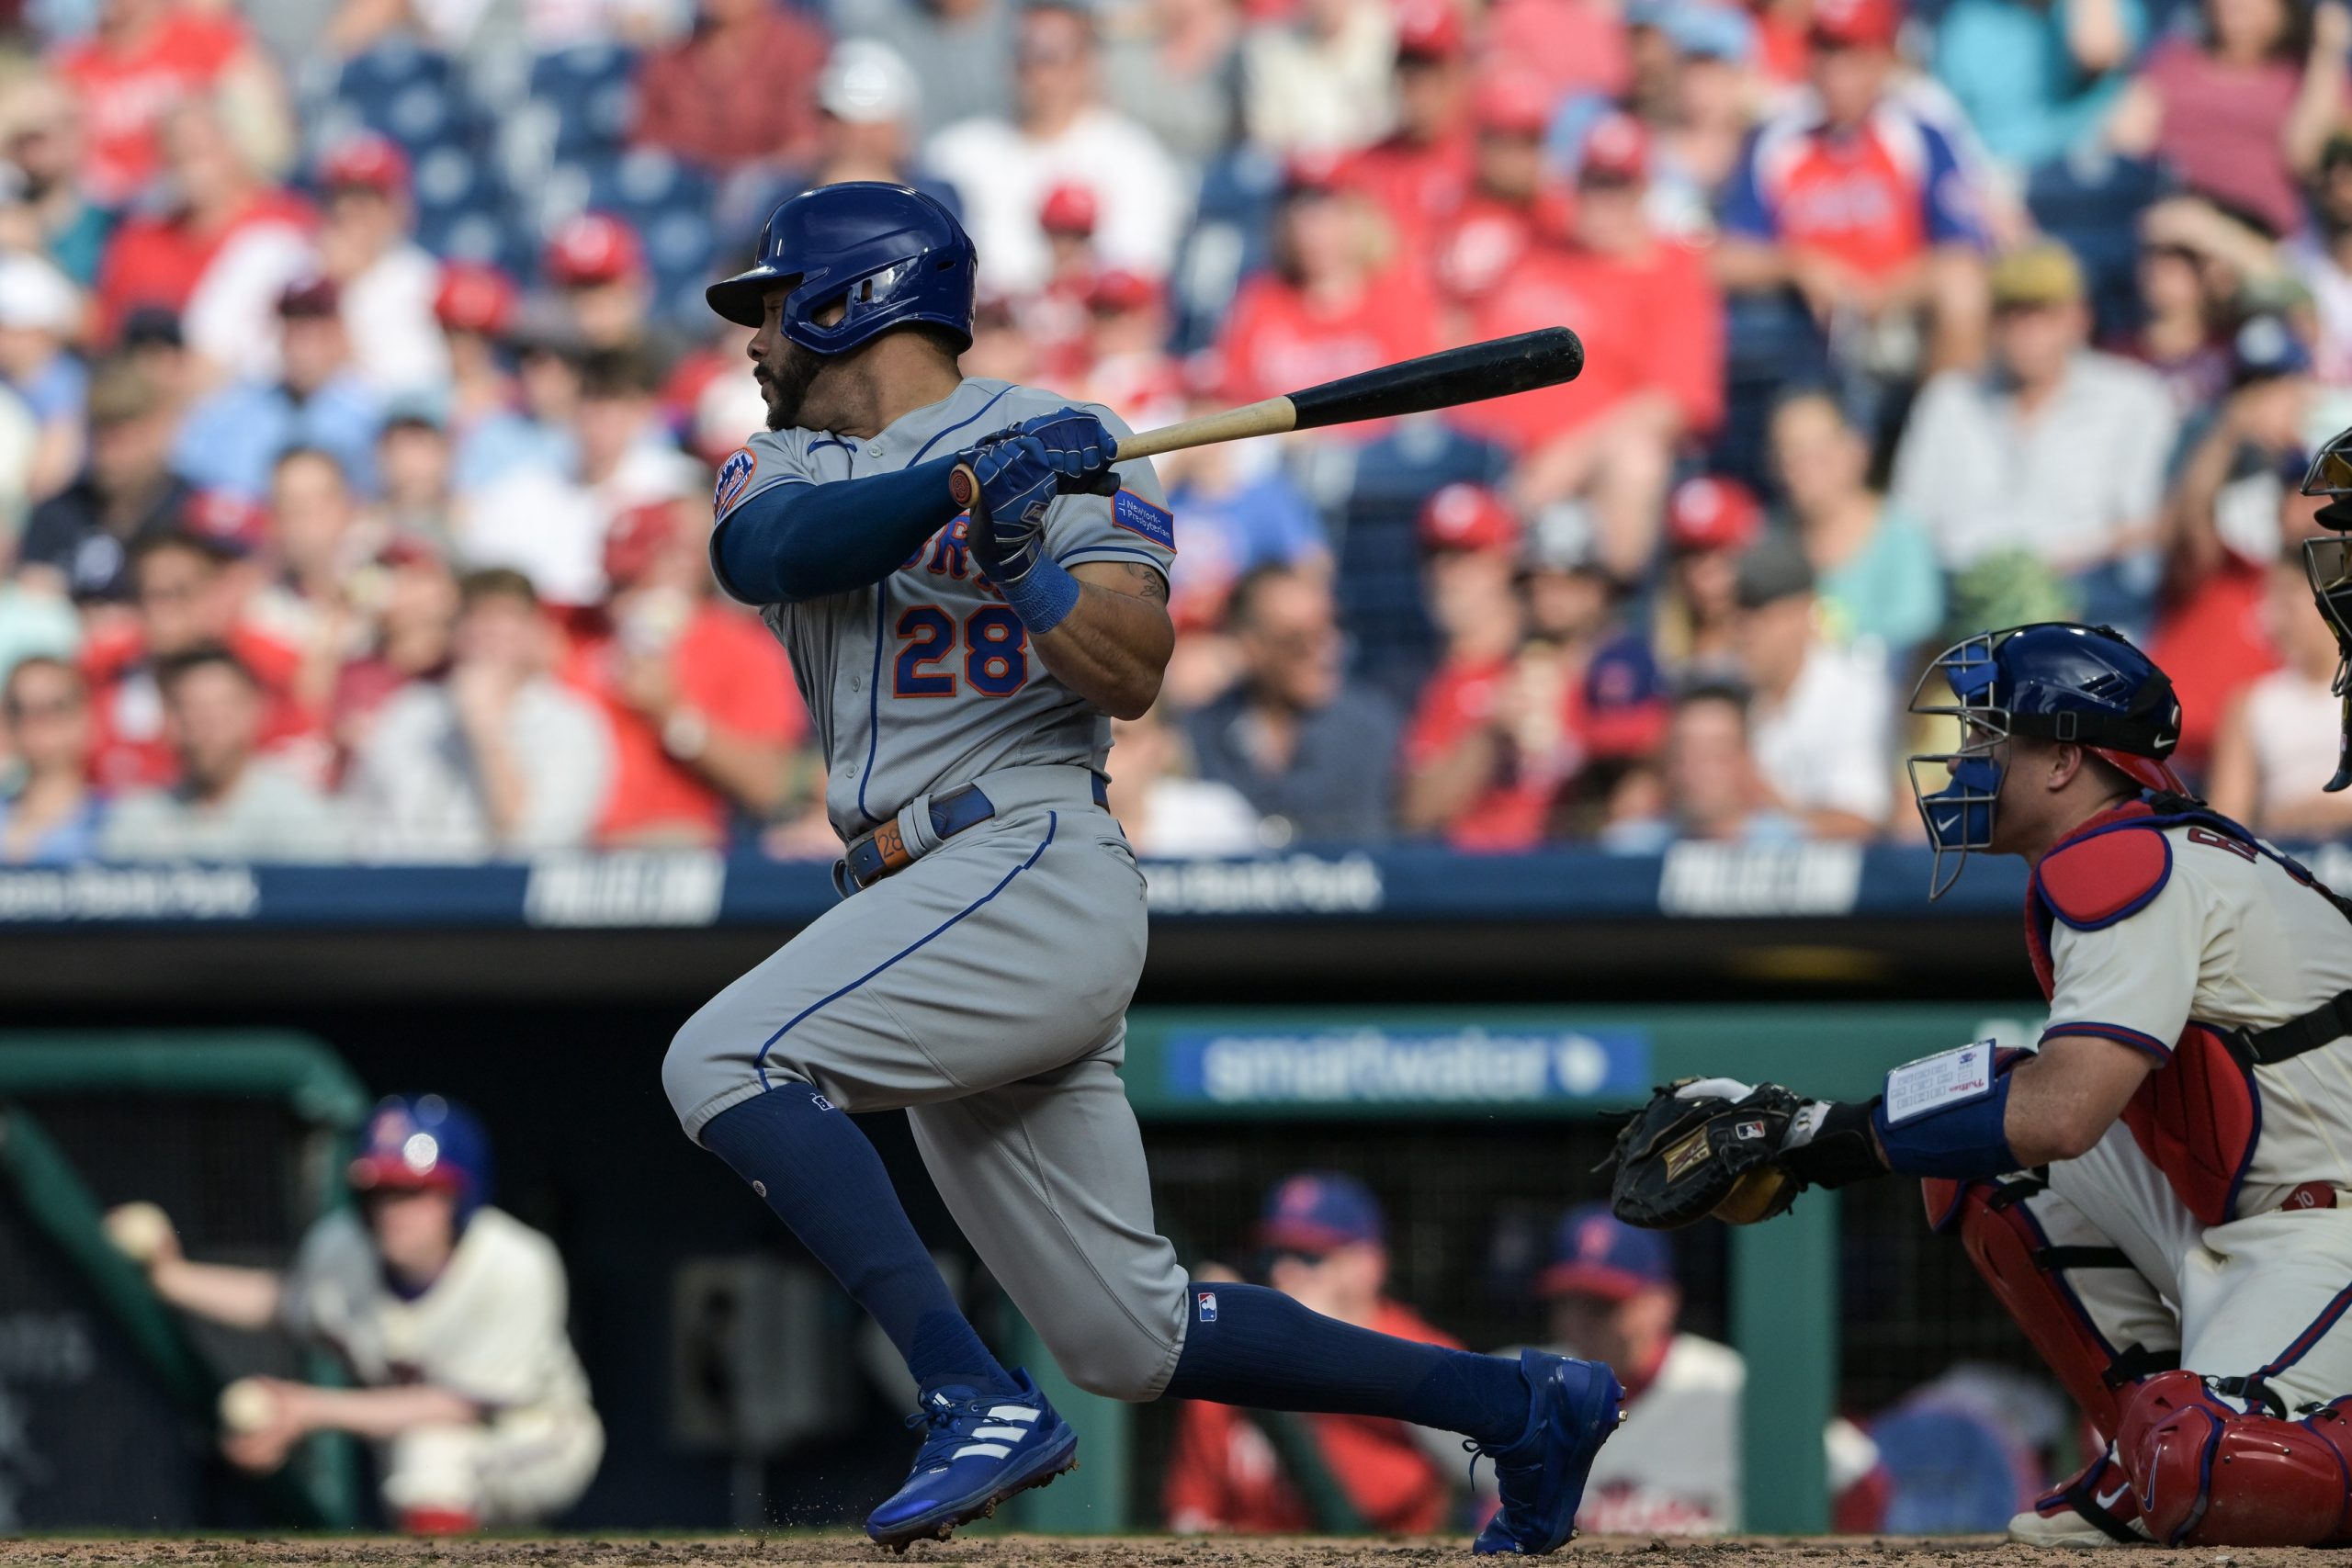 Mets' Mark Canha working his way to good fortune at plate after